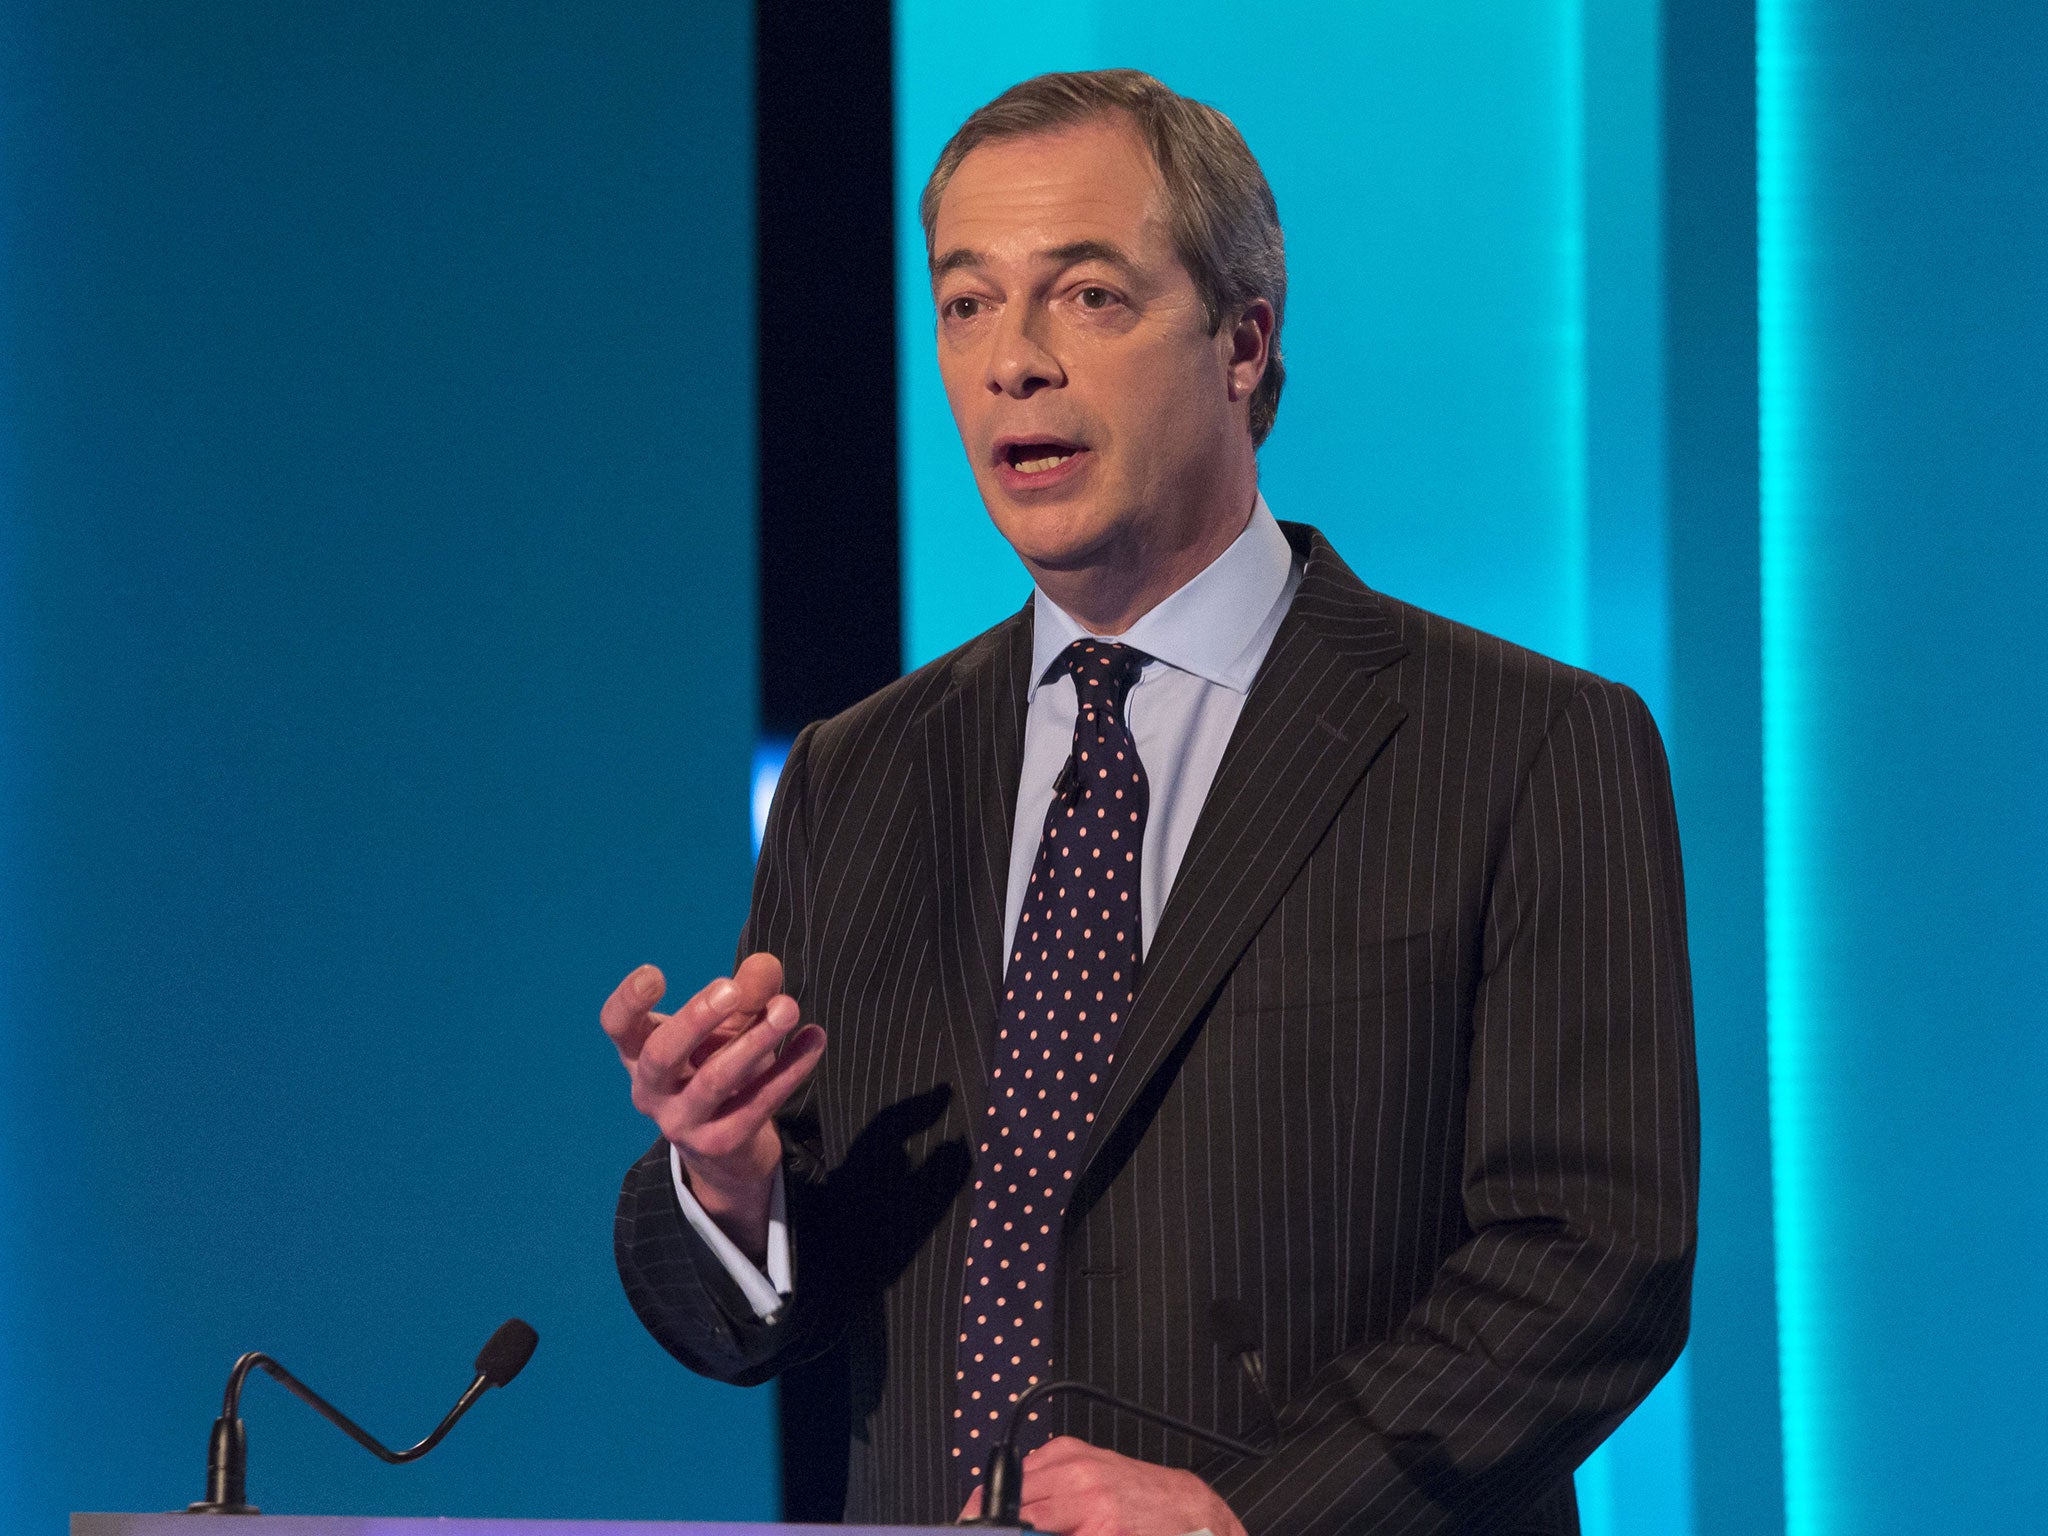 Viewers of the first television leaders' debate thought Mr Farage looked 'sweaty' and unwell